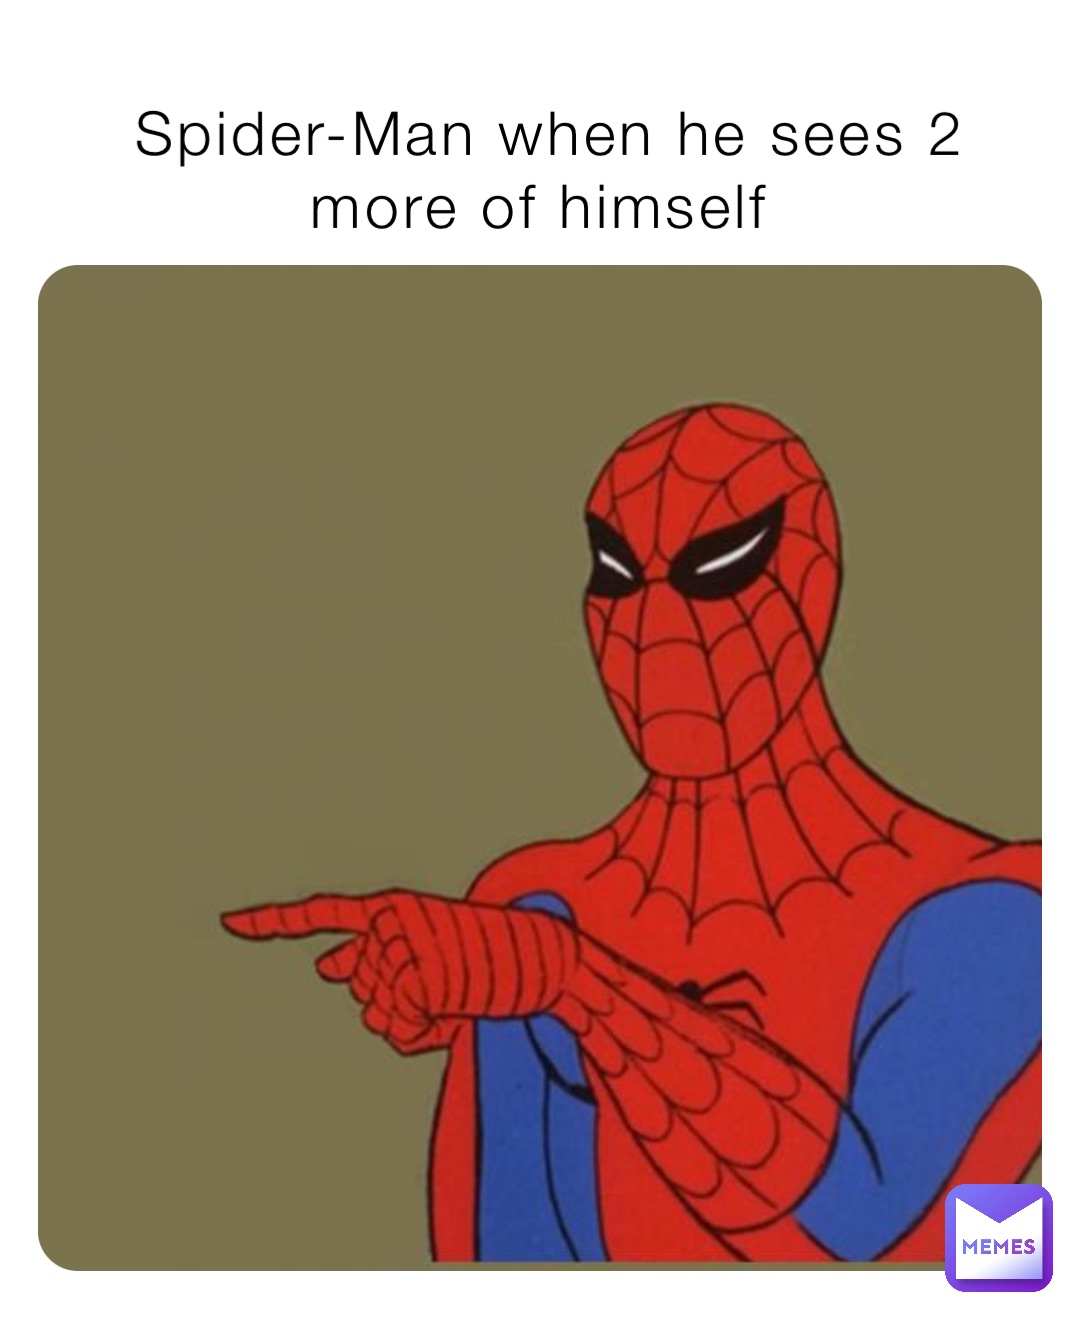 Spider-Man when he sees 2 more of himself | @Memer_pro_2.0 | Memes